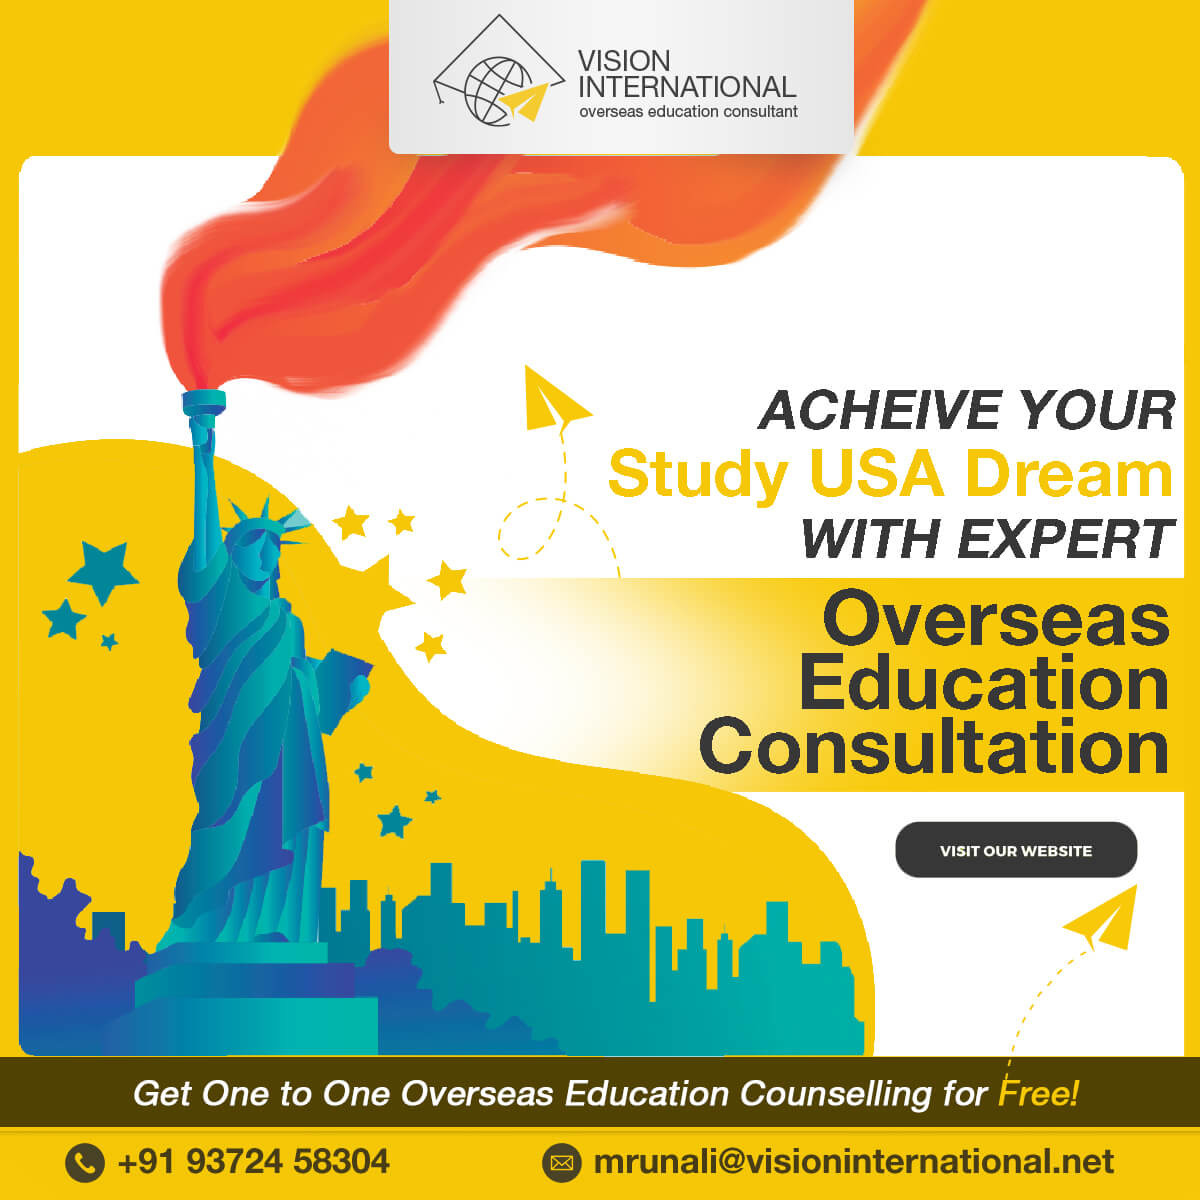 Achieve Your Study Abroad USA Dream with Expert Overseas Education Consultants